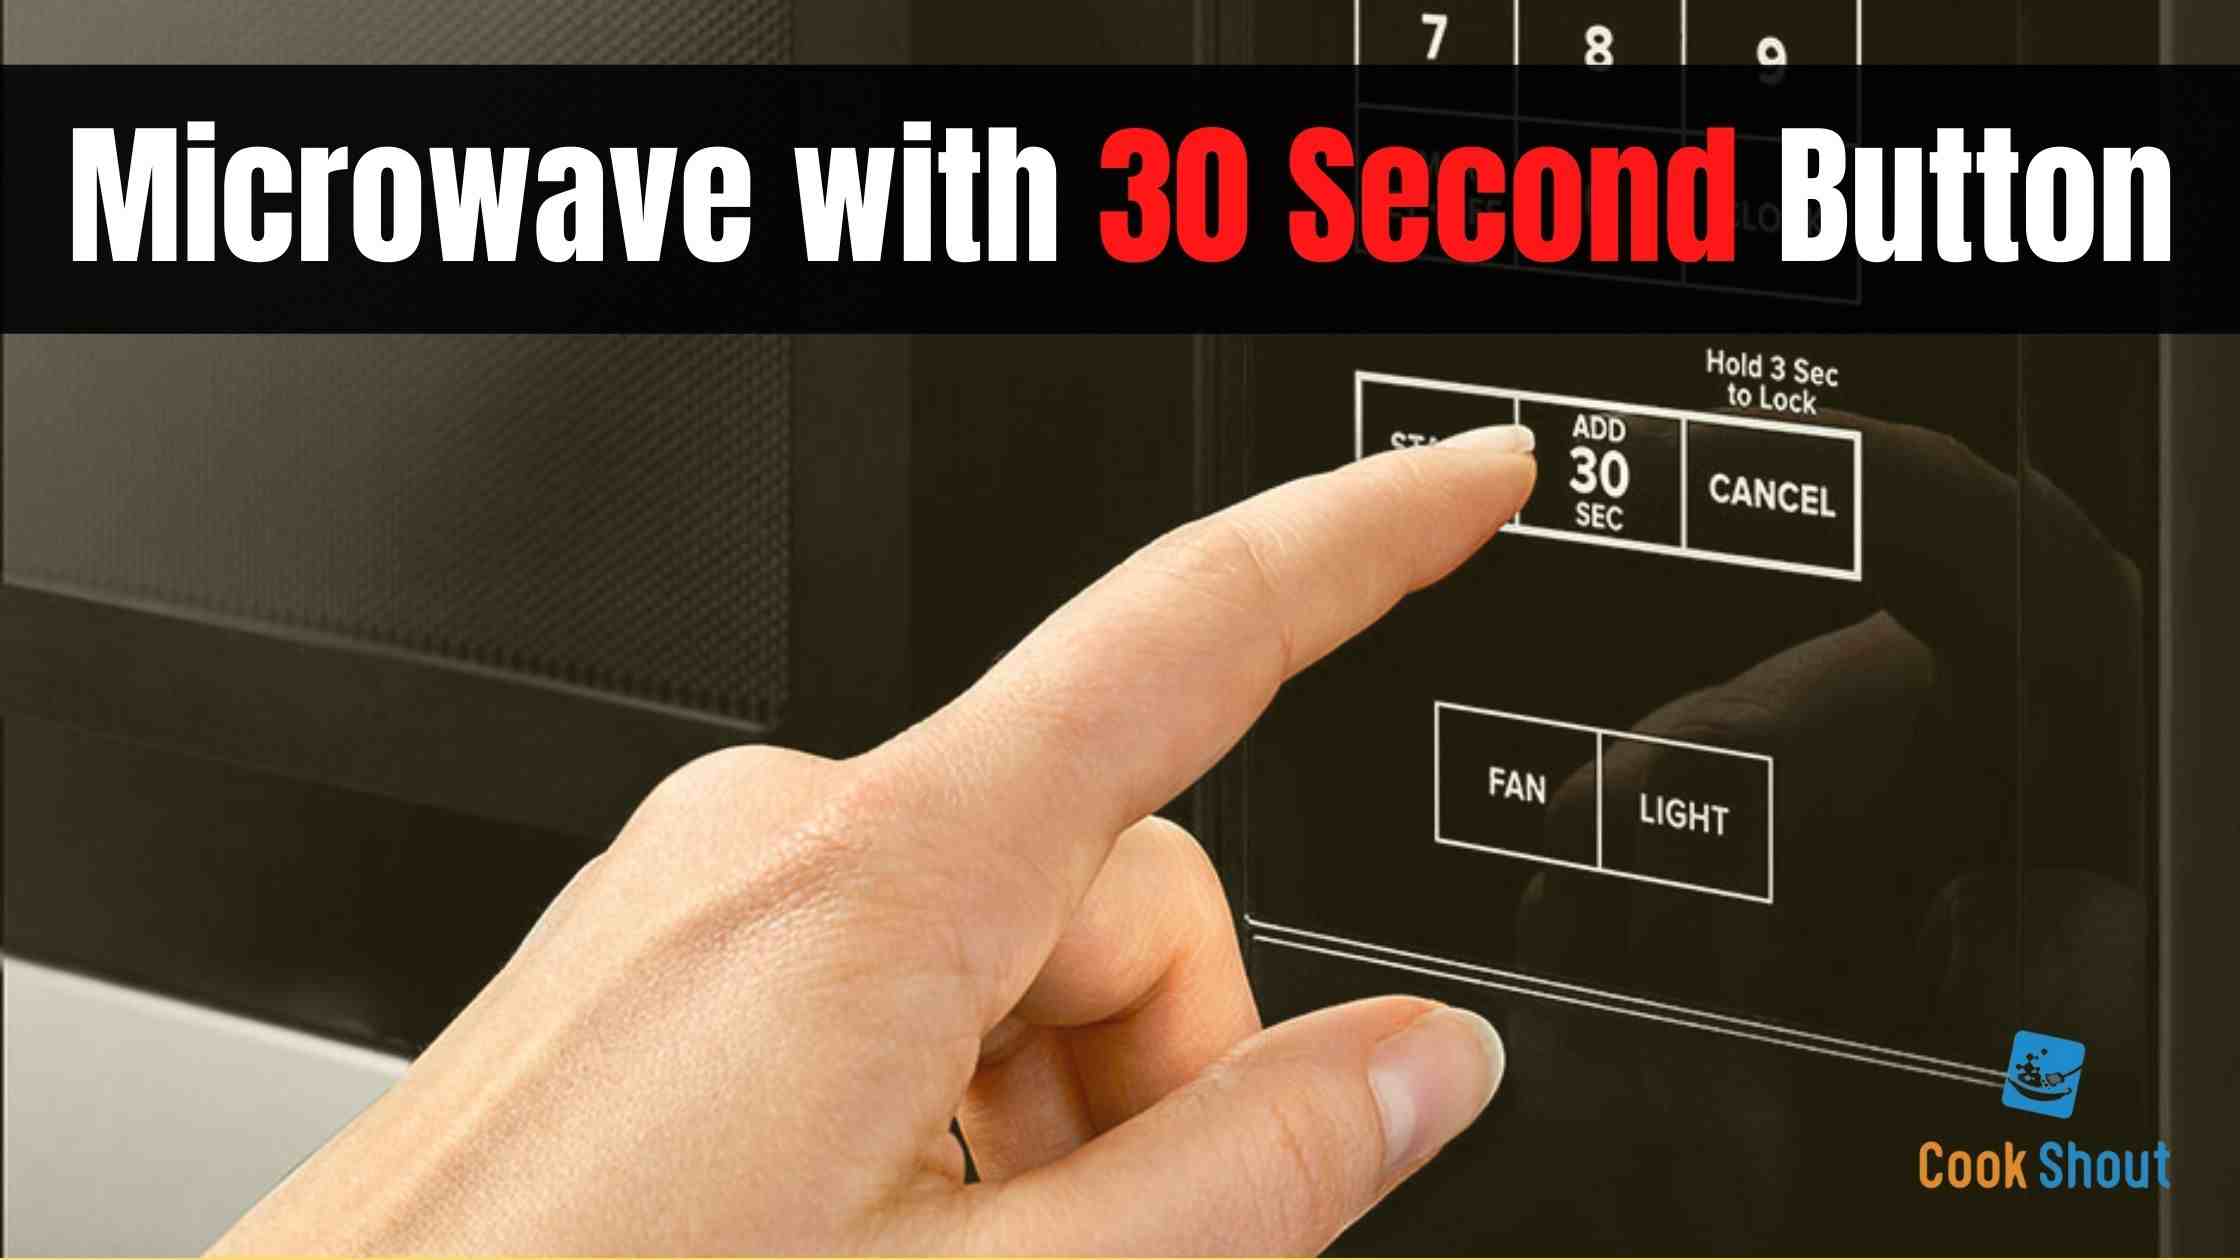 Microwave with 30 Second Button